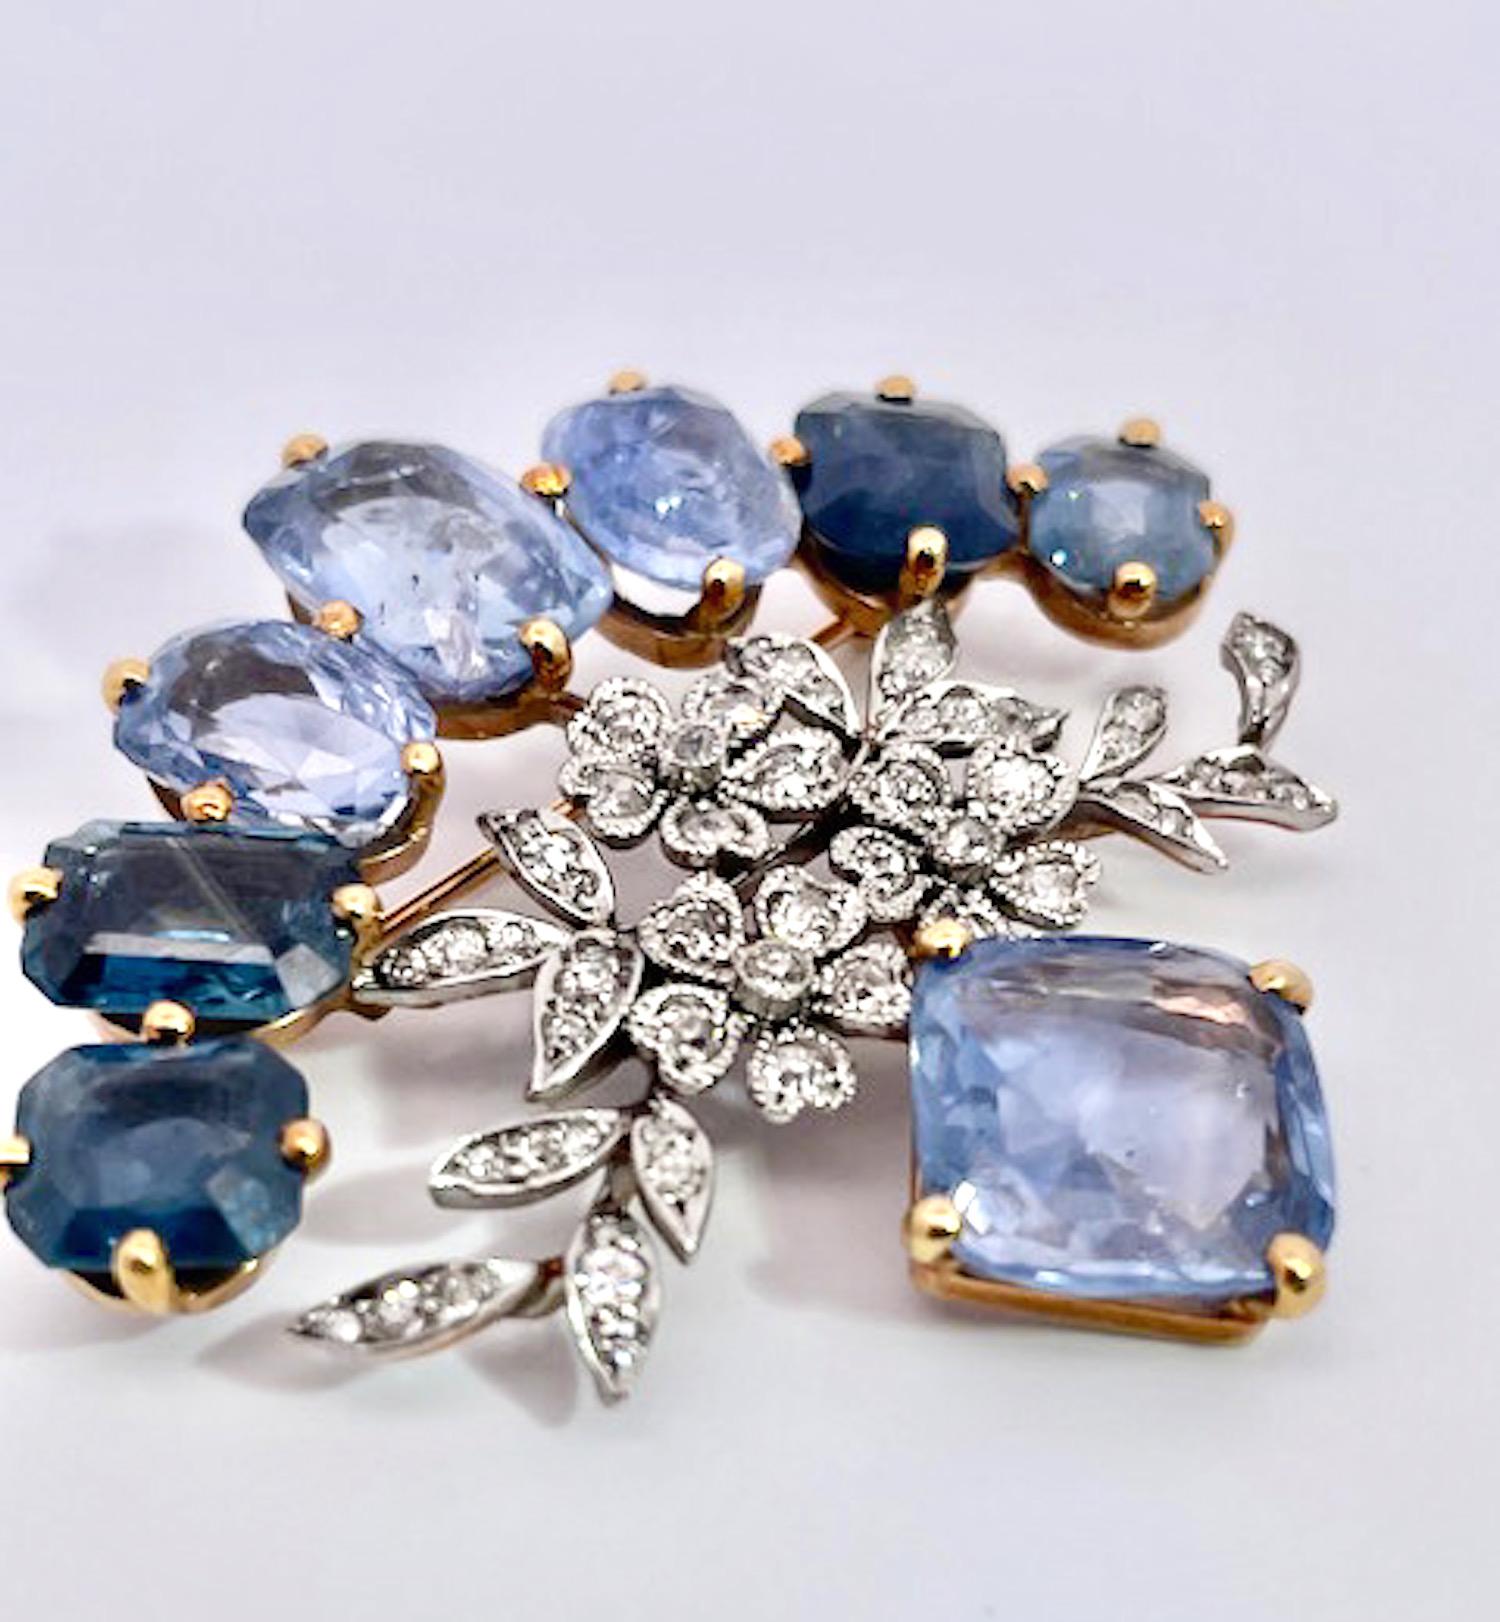 This 18K Sapphire Diamond brooch is unique as it has over 20 carats of Sapphires.  These Sapphires are oval cut and of different colors of Sapphires, from light blue, medium blue and dark blue.  They are set in a semi circular form with Diamond